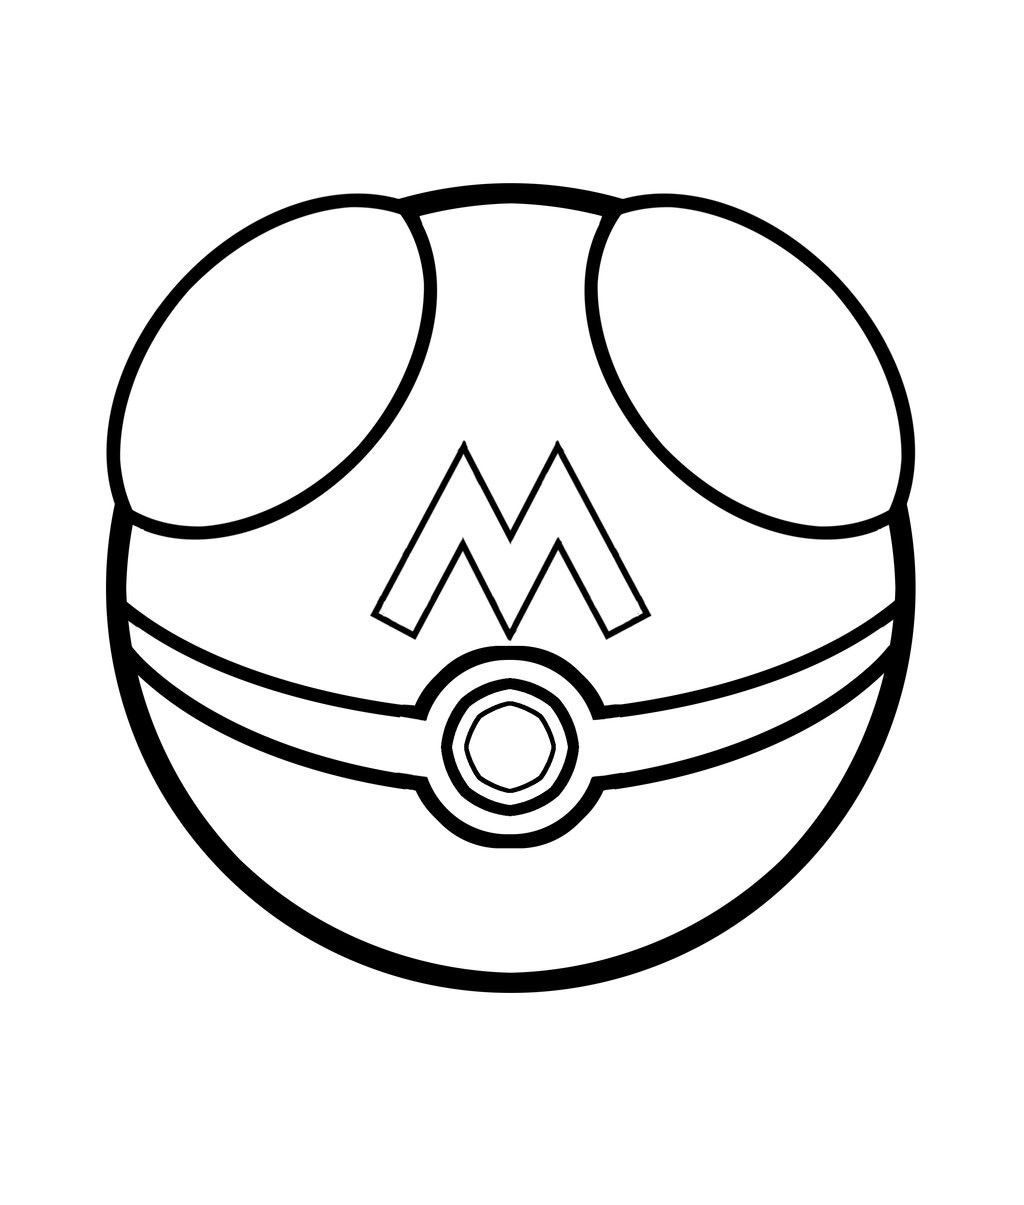 Pokemon coloring pages pokeball â from the thousands of pictures on the net concerning pokemon coloring paâ pokemon coloring pages pokemon coloring pokemon ball